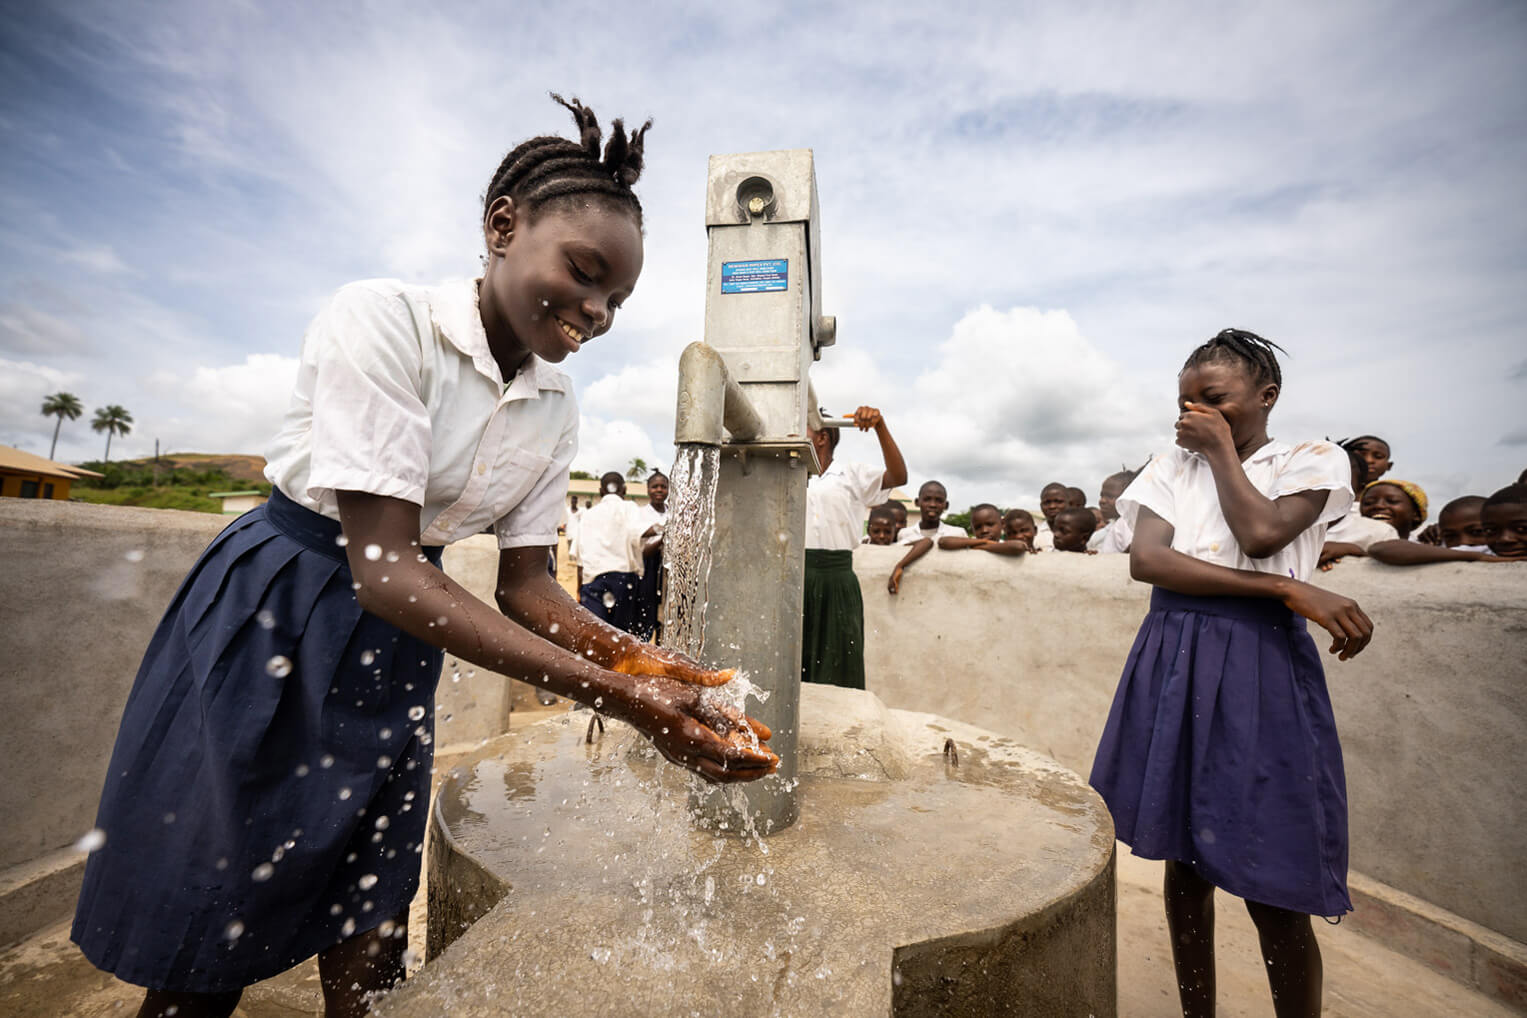 A student at a school in Lofa County, Liberia, is enjoying clean water from a newly-constructed well provided by Samaritan's Purse.